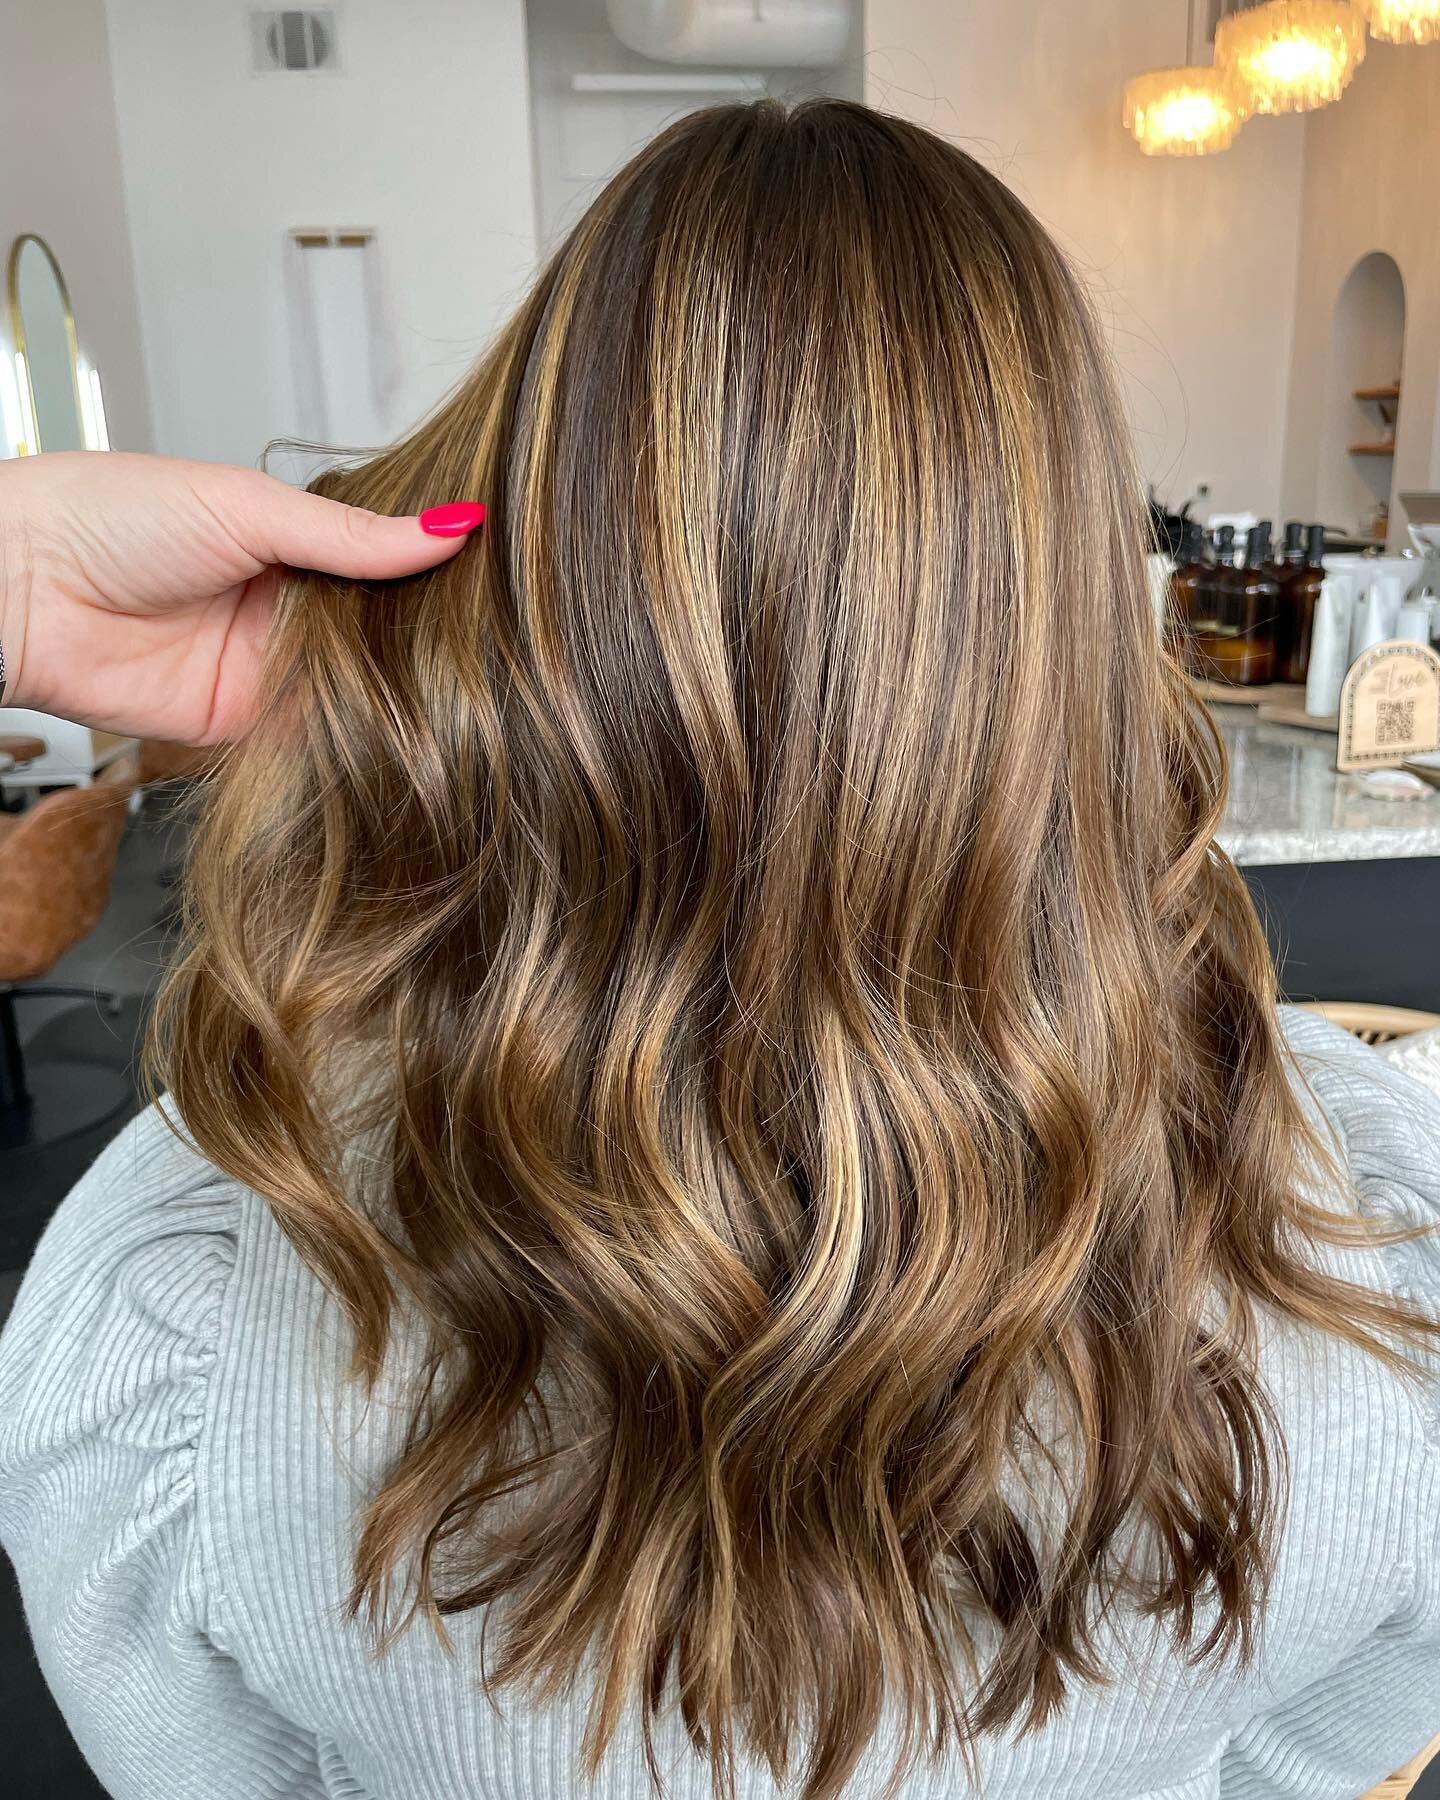 ✨ Balayage Transformation ✨

Swipe to see the magic! 👉🏼➡️ after &amp; before 

I love a good balayage transformation! 😍 My lovely new client came in with a balayage that had grown out from over a year ago! 

With some balayage hair painting, we we